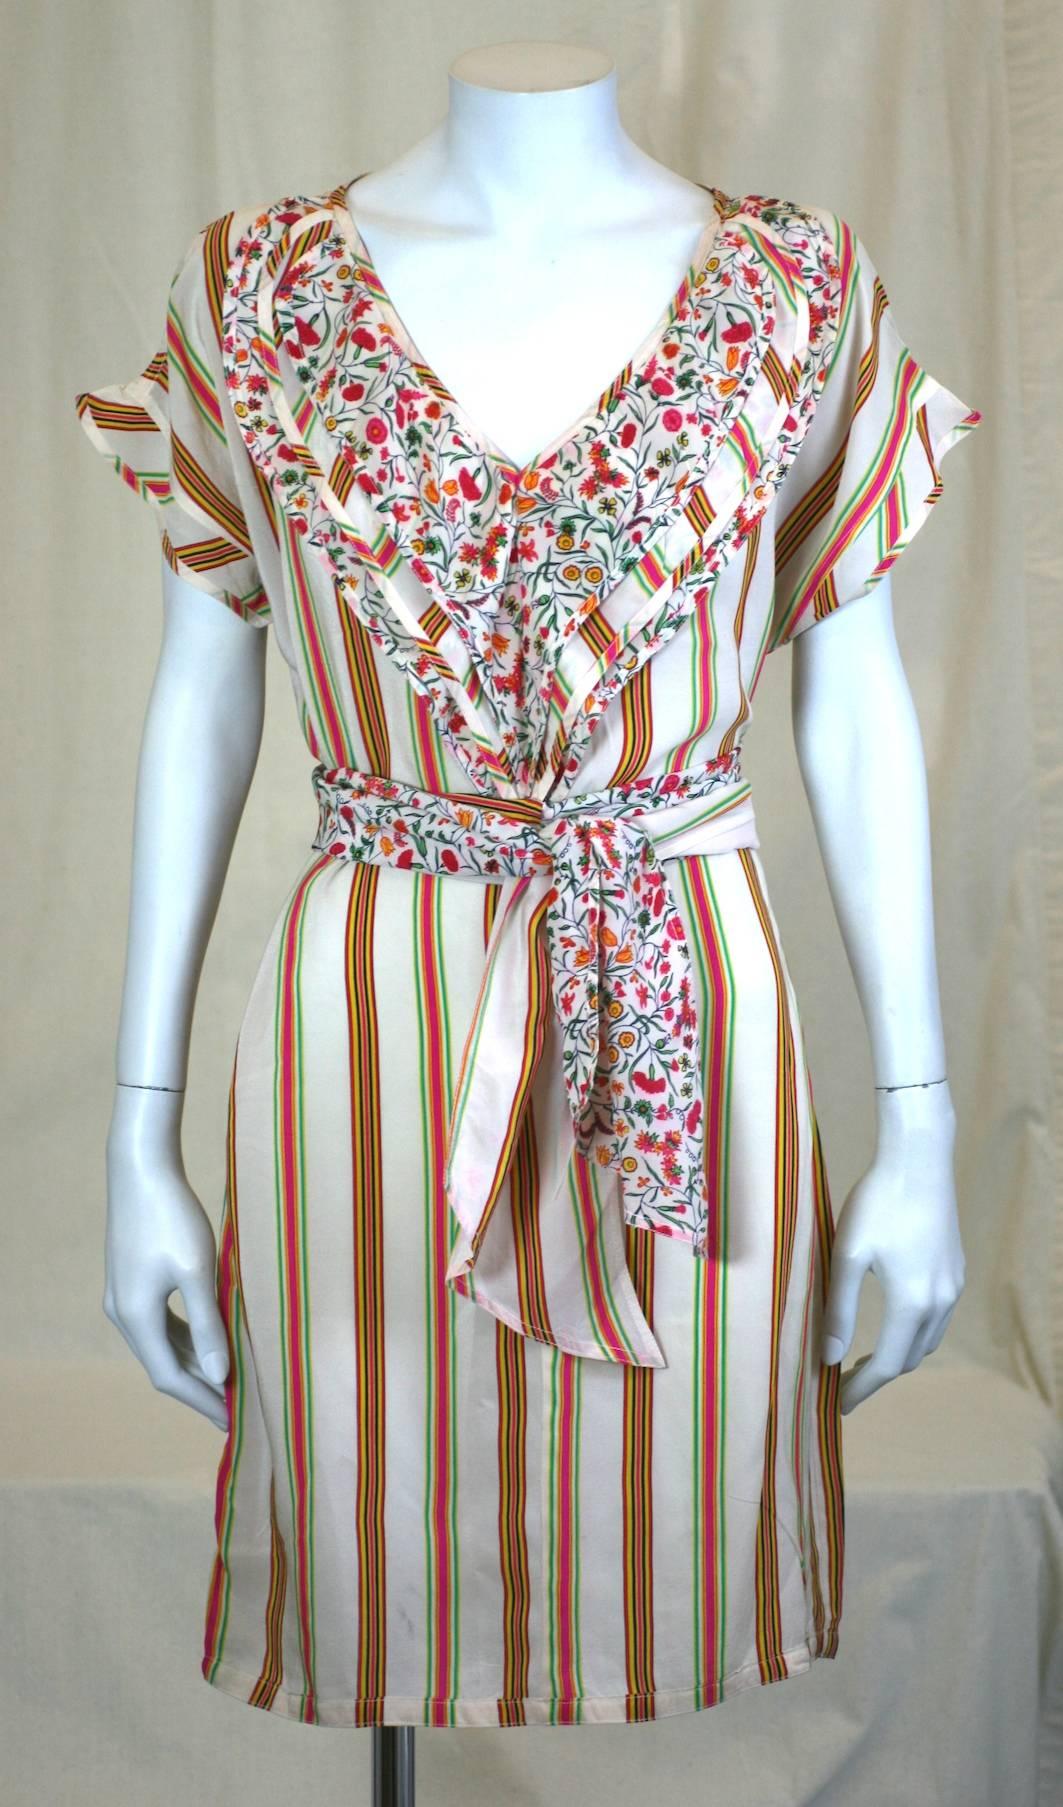 Early Gianni Versace Silk Crepe Floral-Stripe Melange Tunic or Mini dress. Multiple patterned flounces at neckline. Matching long double patterned scarf to use around neck or waist. Small size. 1980's Italy. 
Excellent condition. 